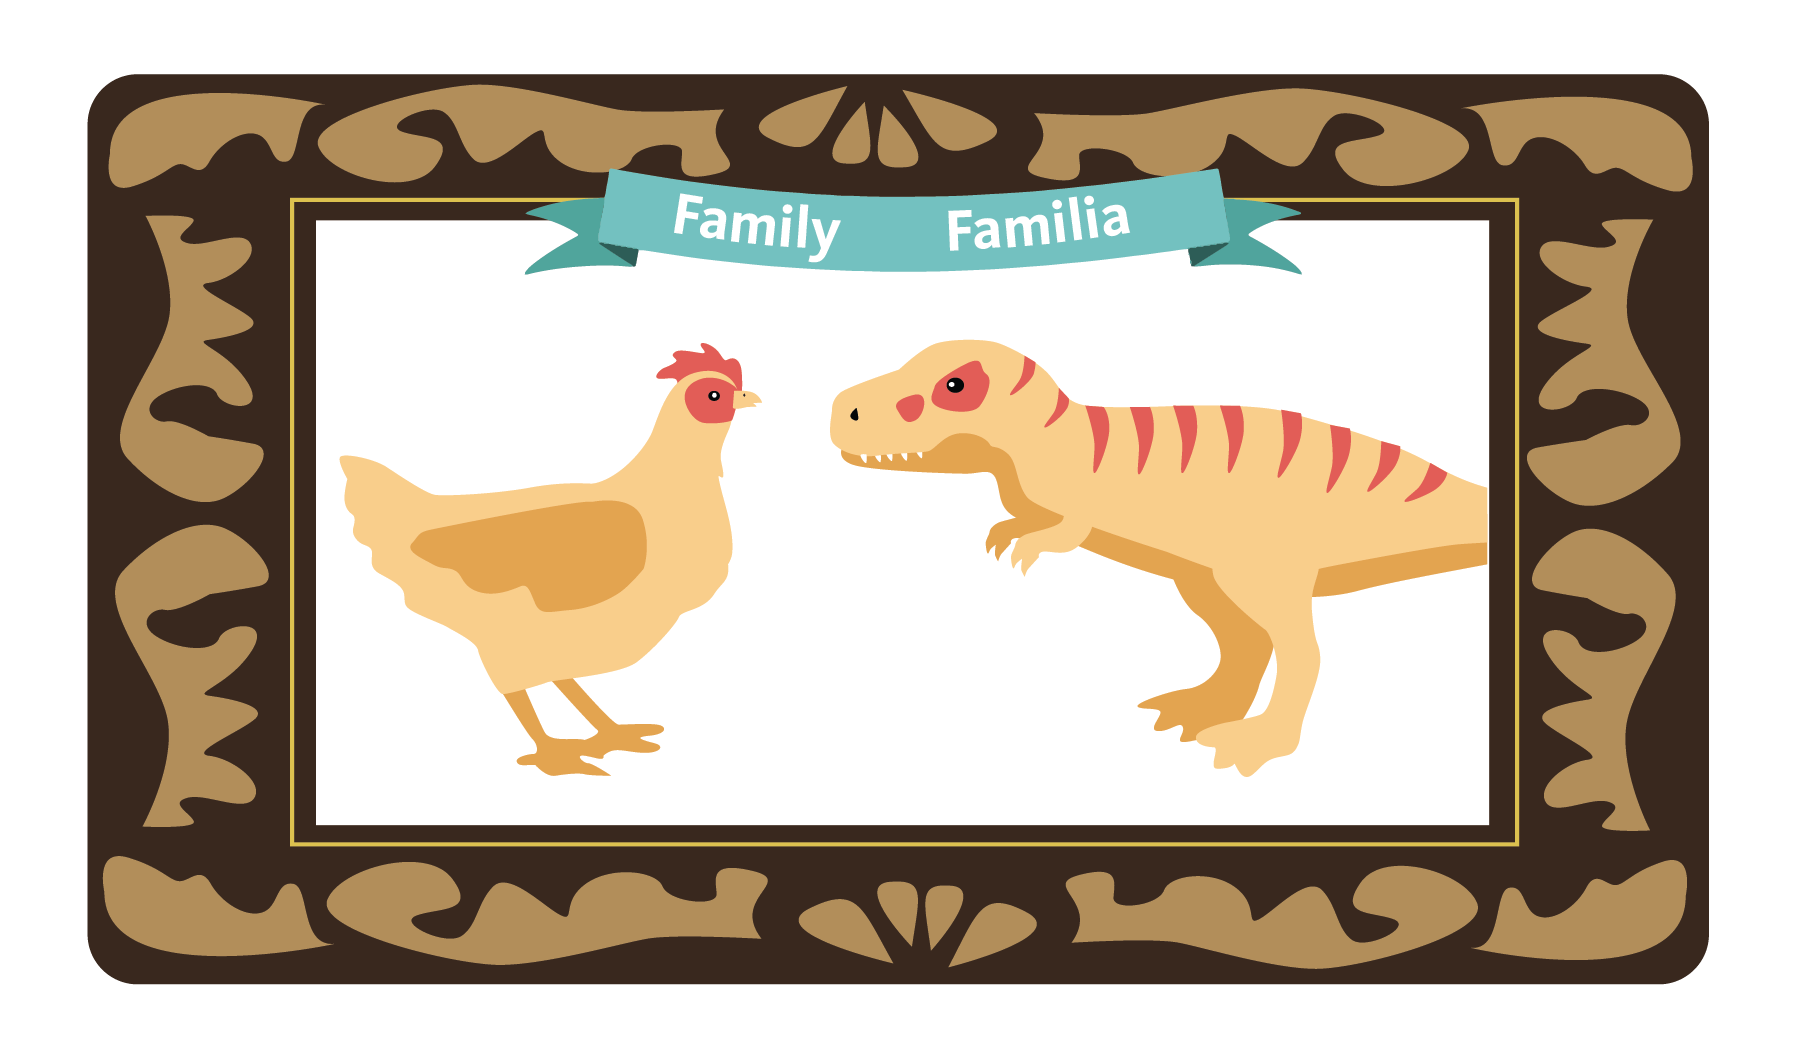 Family portrait with a chicken and a dinosaur